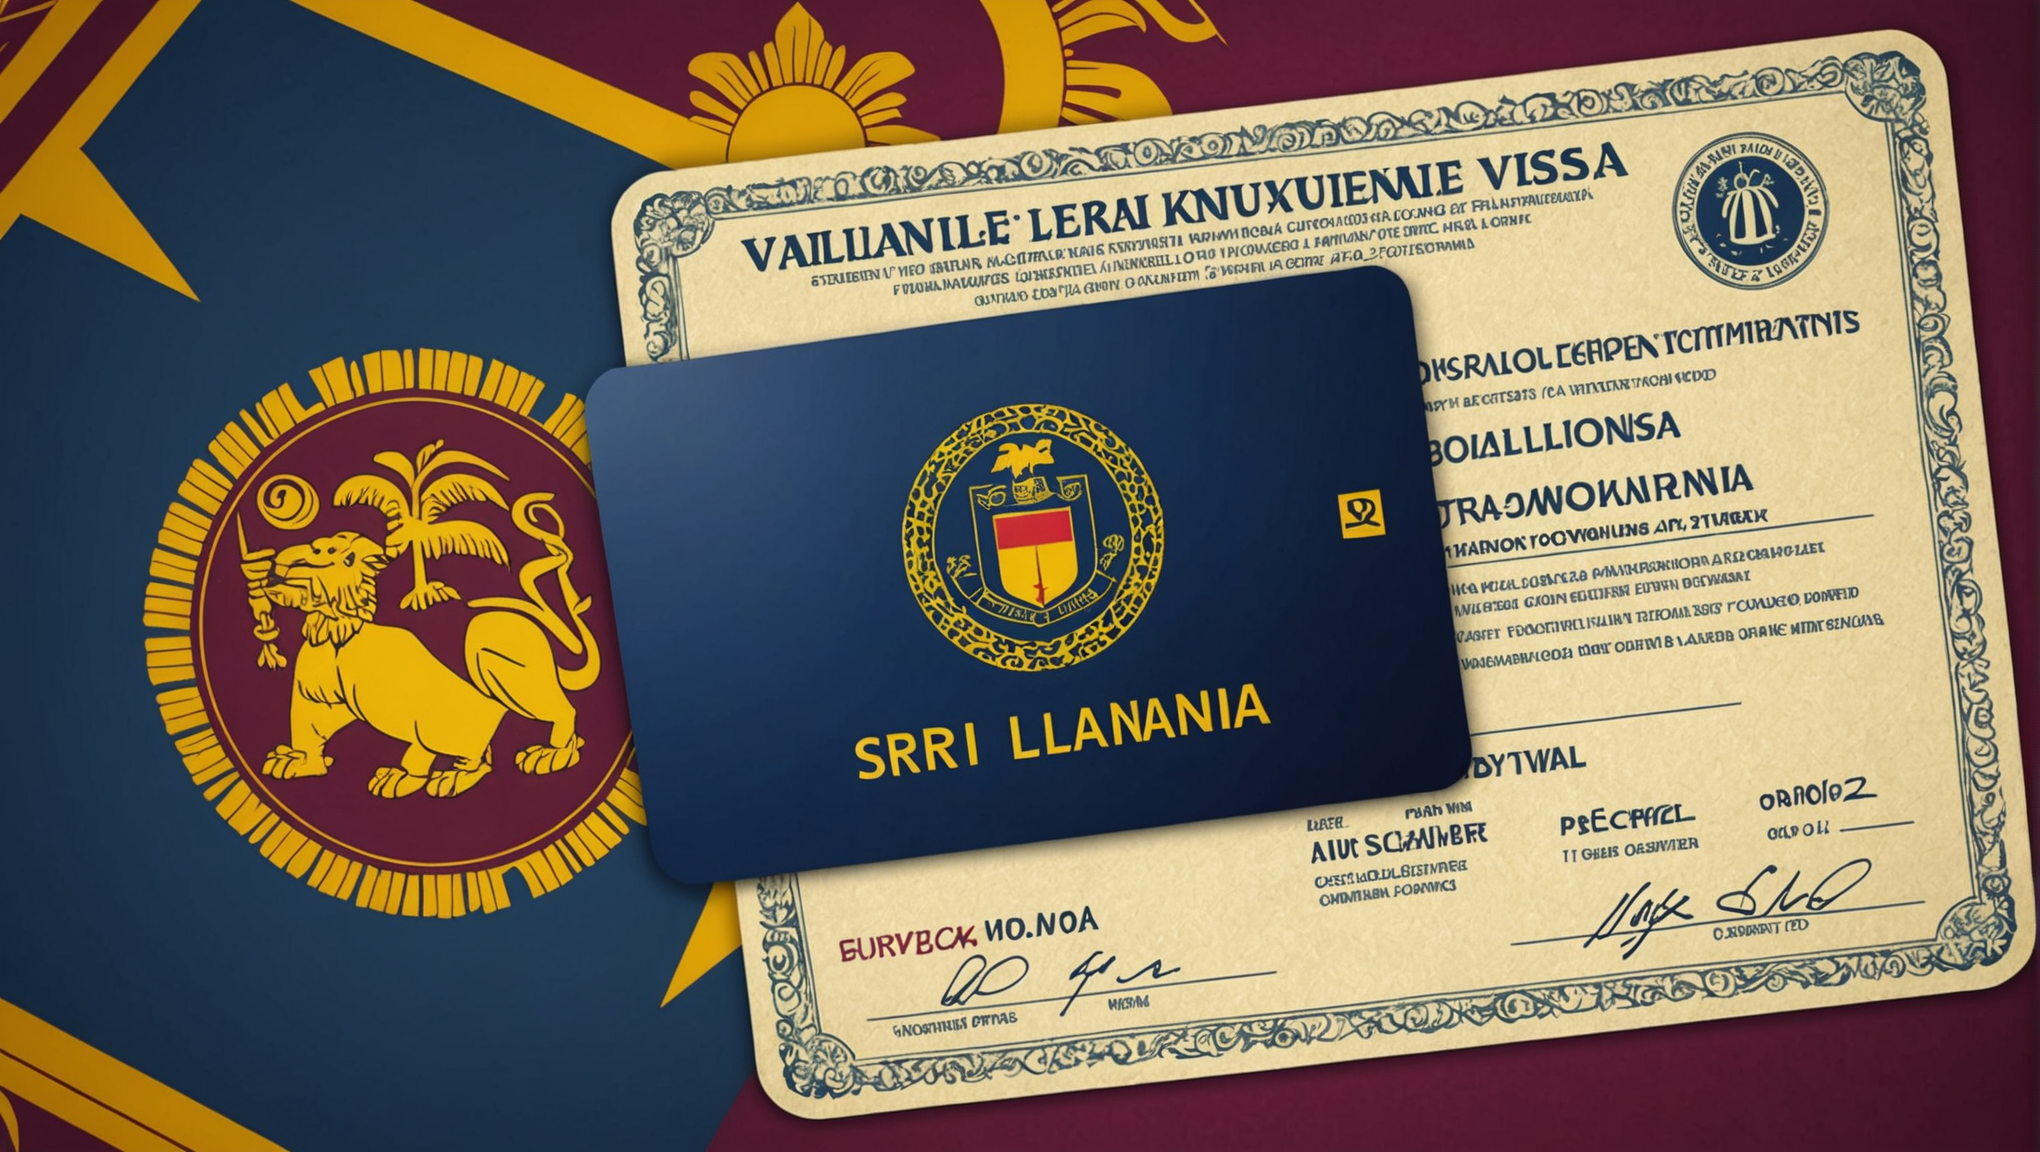 find out more about the validity criteria for obtaining an e-visa for sri lanka and prepare for your trip with peace of mind.